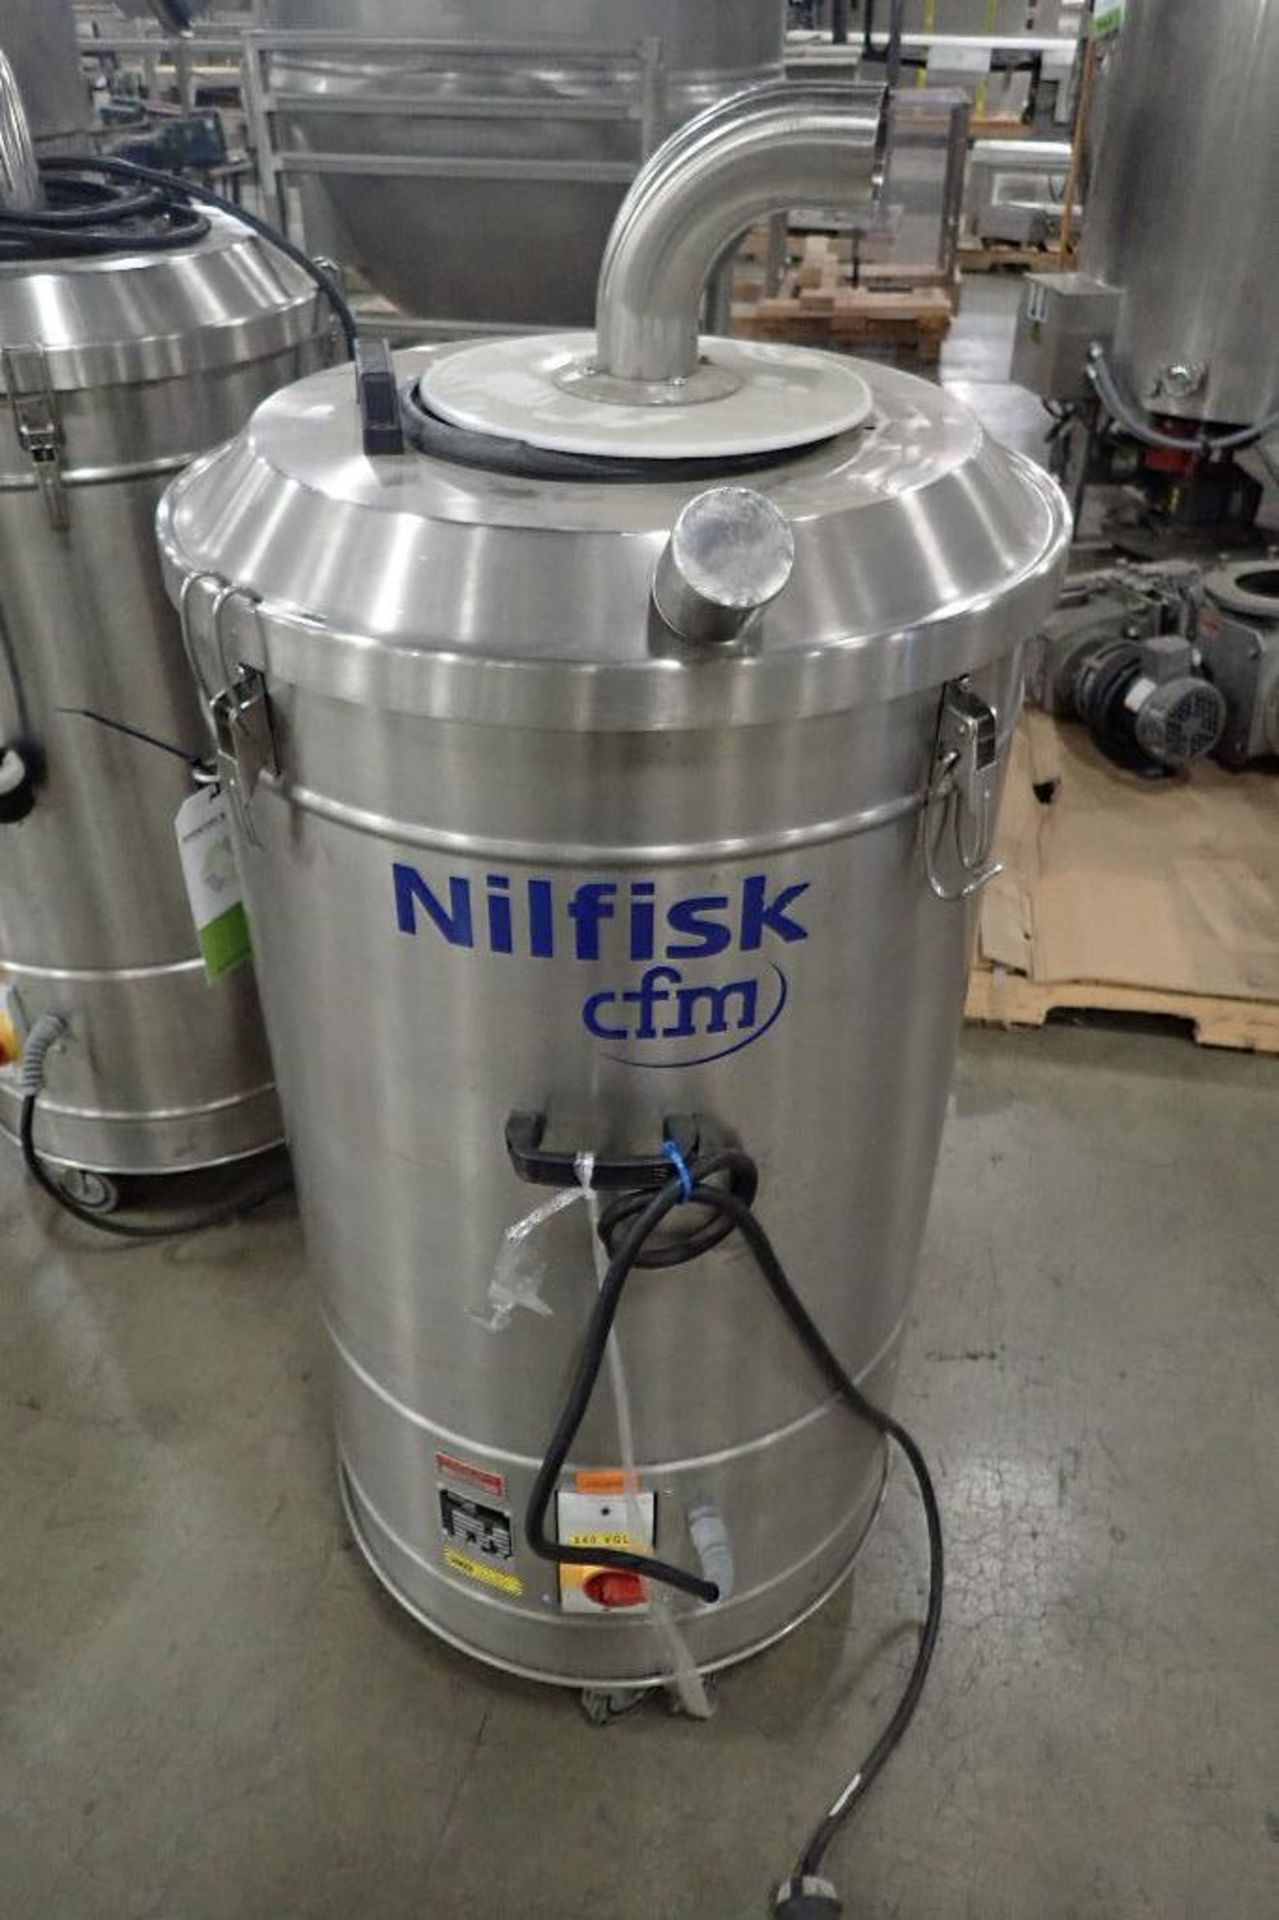 Nilfisk commercial vacuum, Type R305X, SN 04AK425. **Rigging Fee: $25** (Located in 3703 - Eagan, MN